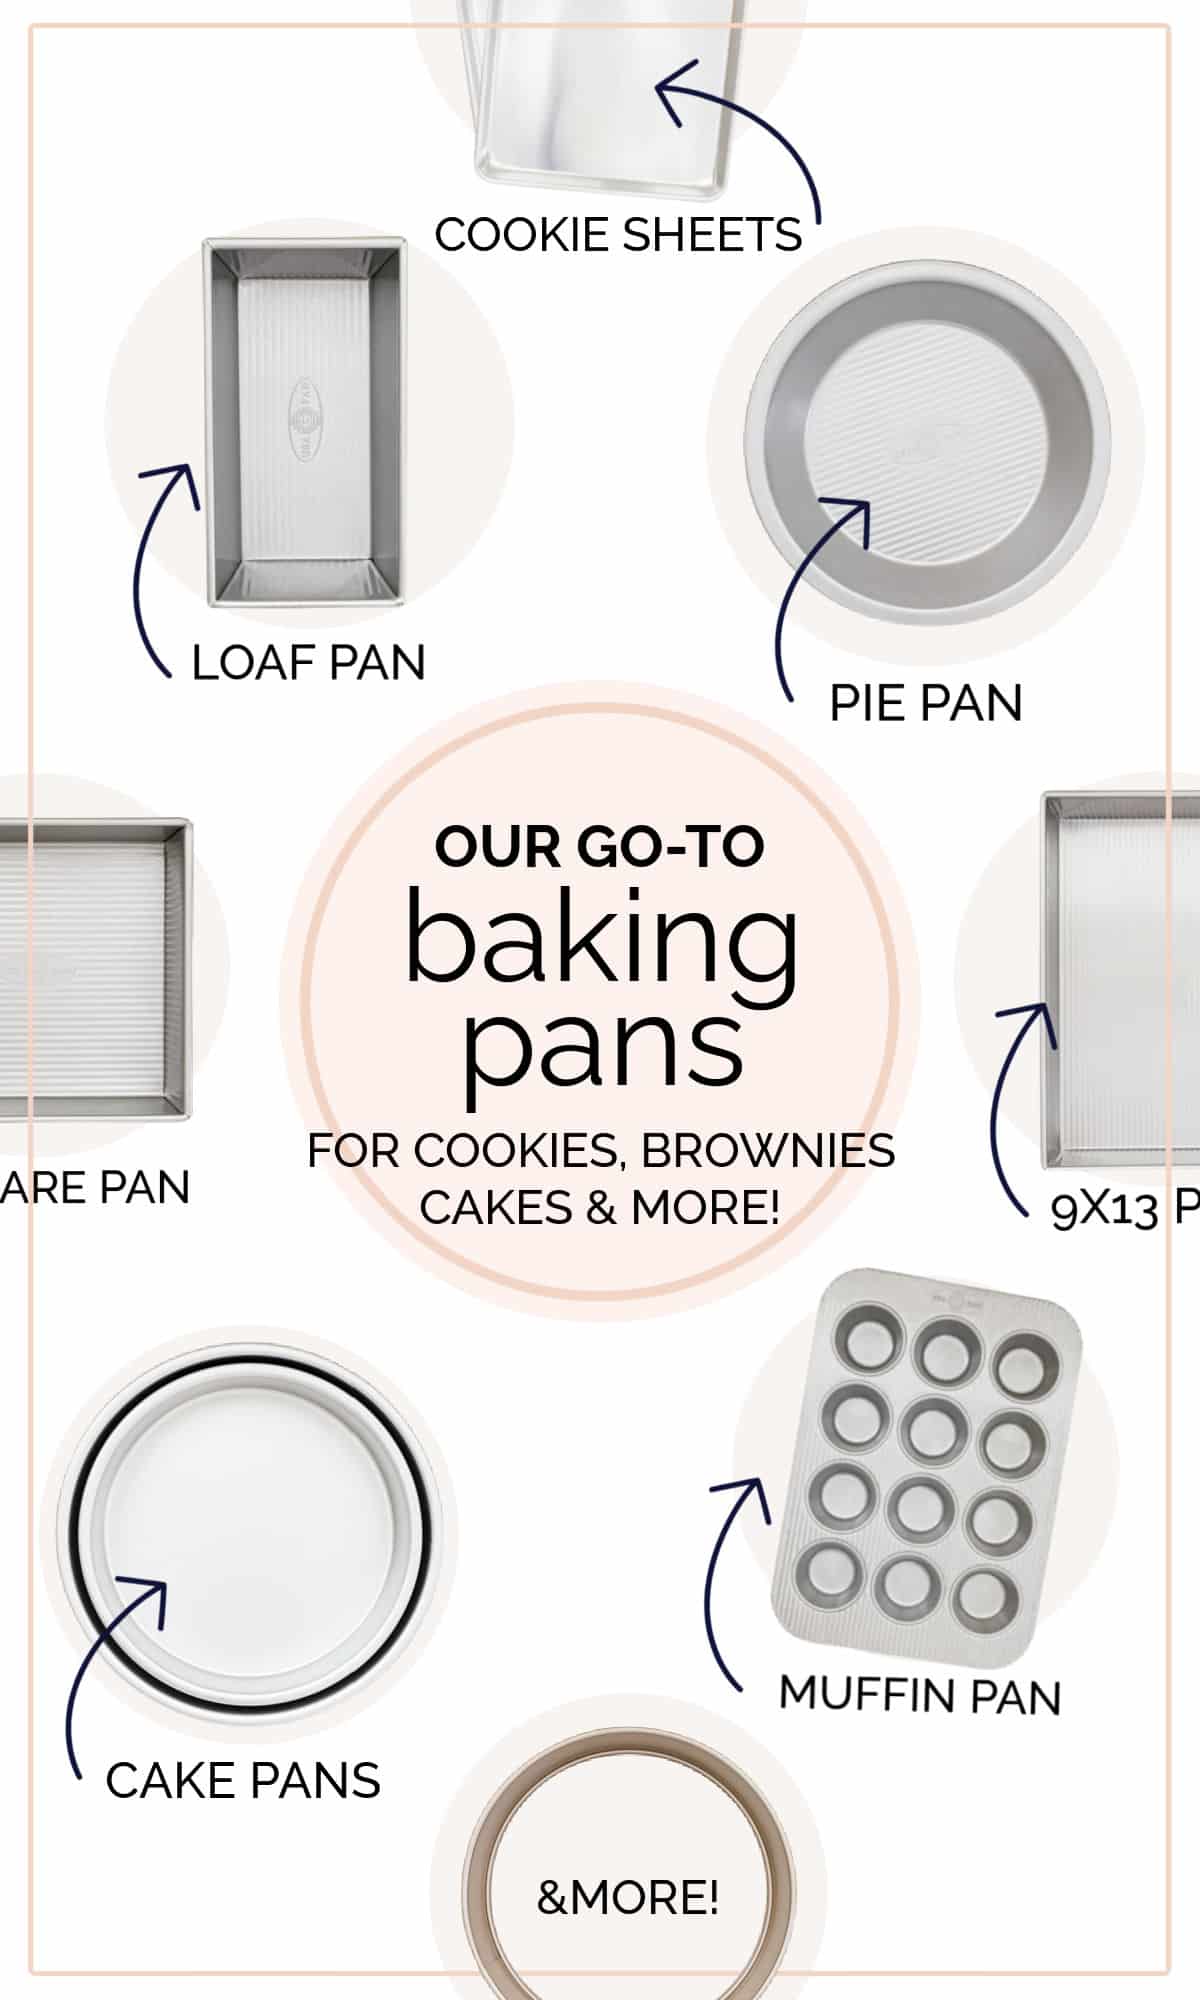 These are the baking pans we use all the time. Find the best pan for cakes, cookies, brownies, and more! / the best cookie sheets / the best pan for brownies / the best cake pans / gifts for bakers / gifts for home bakers / best pans for baking / baking dishes / best pie pans / best loaf pans 